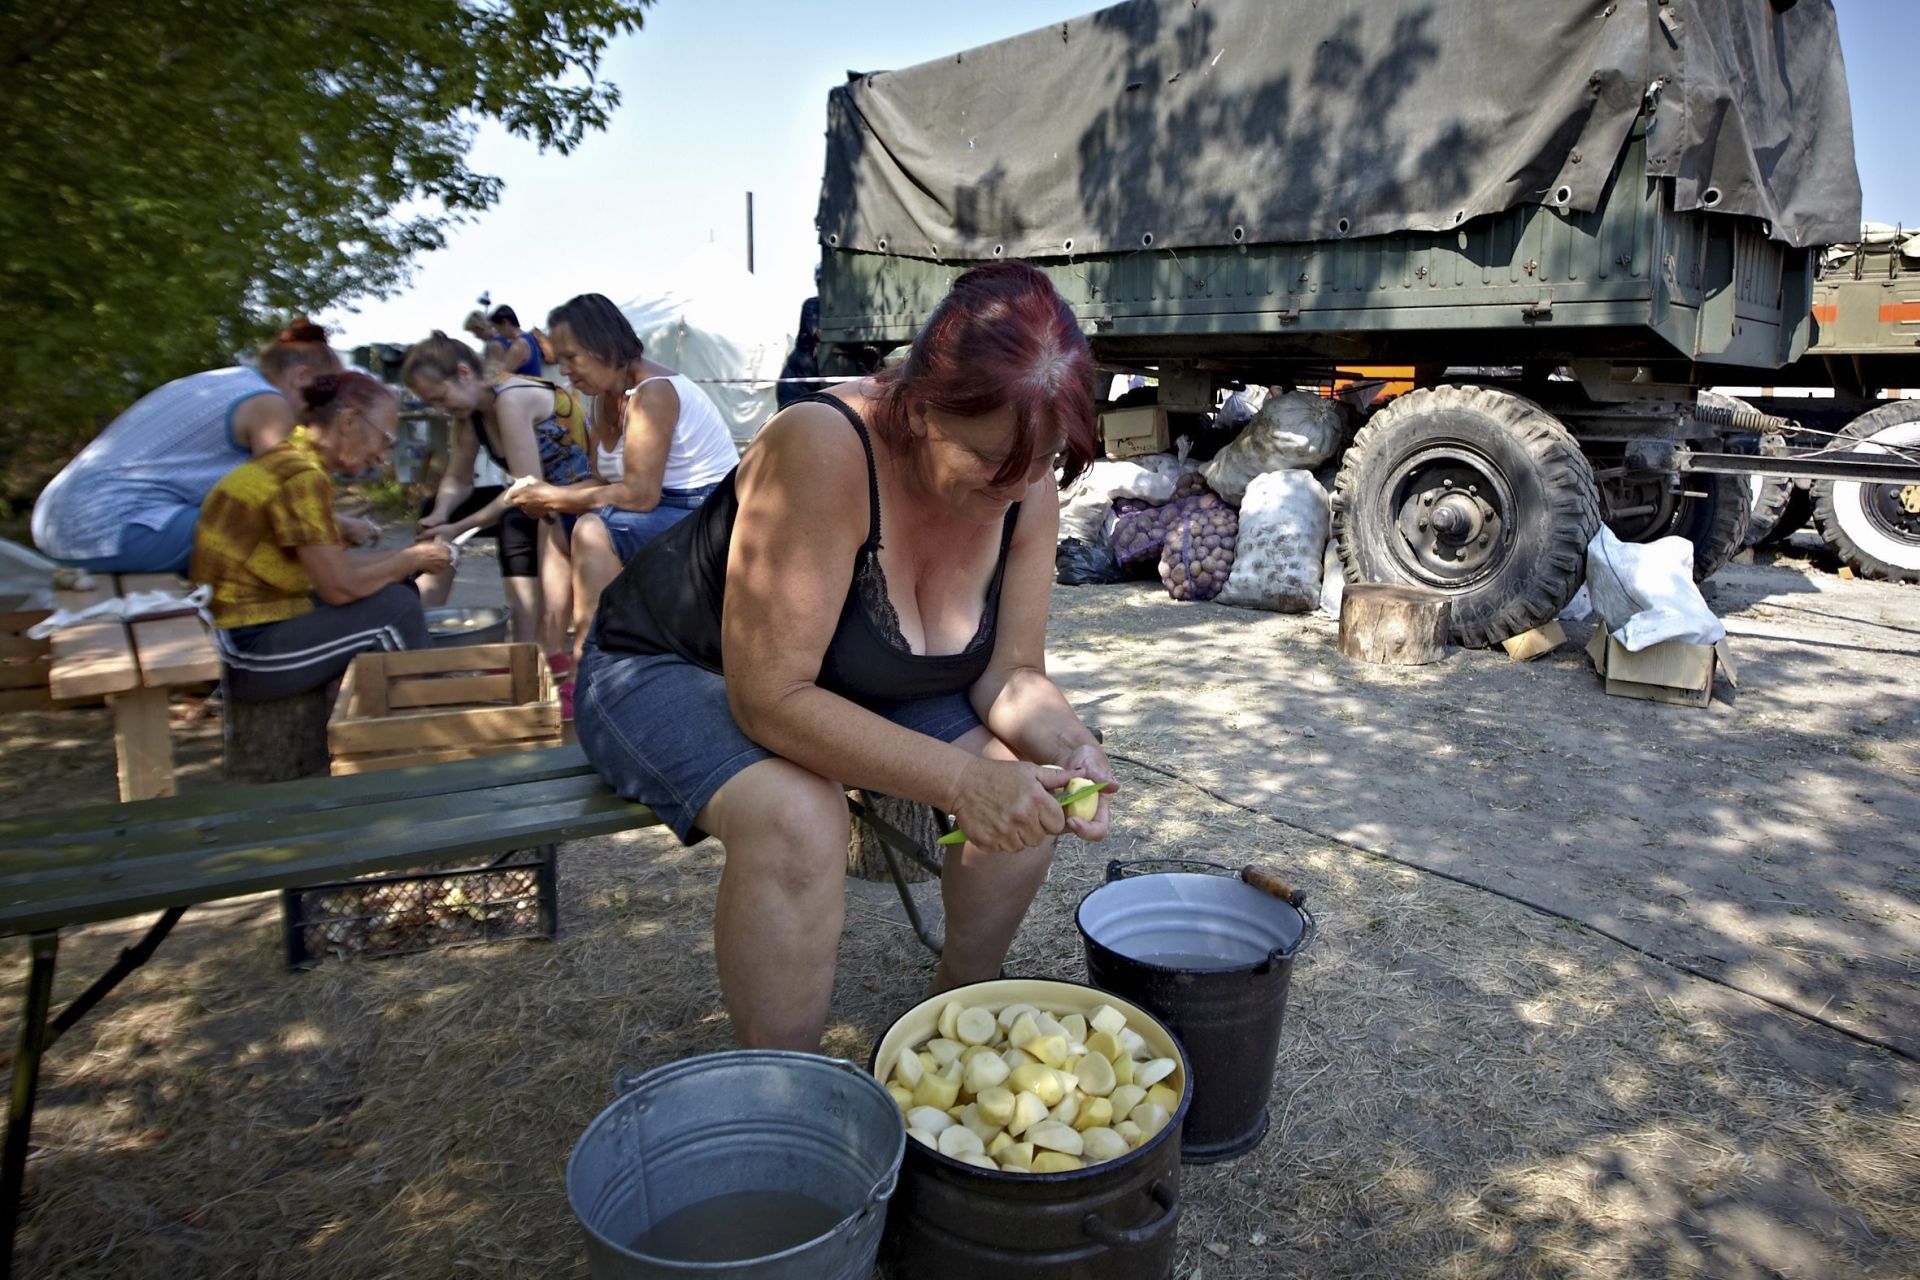 epa04351303 A picture made available on 13 August shows a Ukrainian woman from eastern Ukraine preparing food at a temporary refugee camp in Svatovo village, Lugansk area, Ukraine, 12 August 2014. A convoy of Russian aid trucks were heading to Ukraine's Luhansk region, where hundreds of thousands of civilians have been without electricity and mains water for 10 days. The convoy was due to reach embattled eastern Ukraine early 13 August, amid requests from Kiev that the 280 trucks be searched for military gear and threats to block the delivery.  EPA/SERGEI KOZLOV